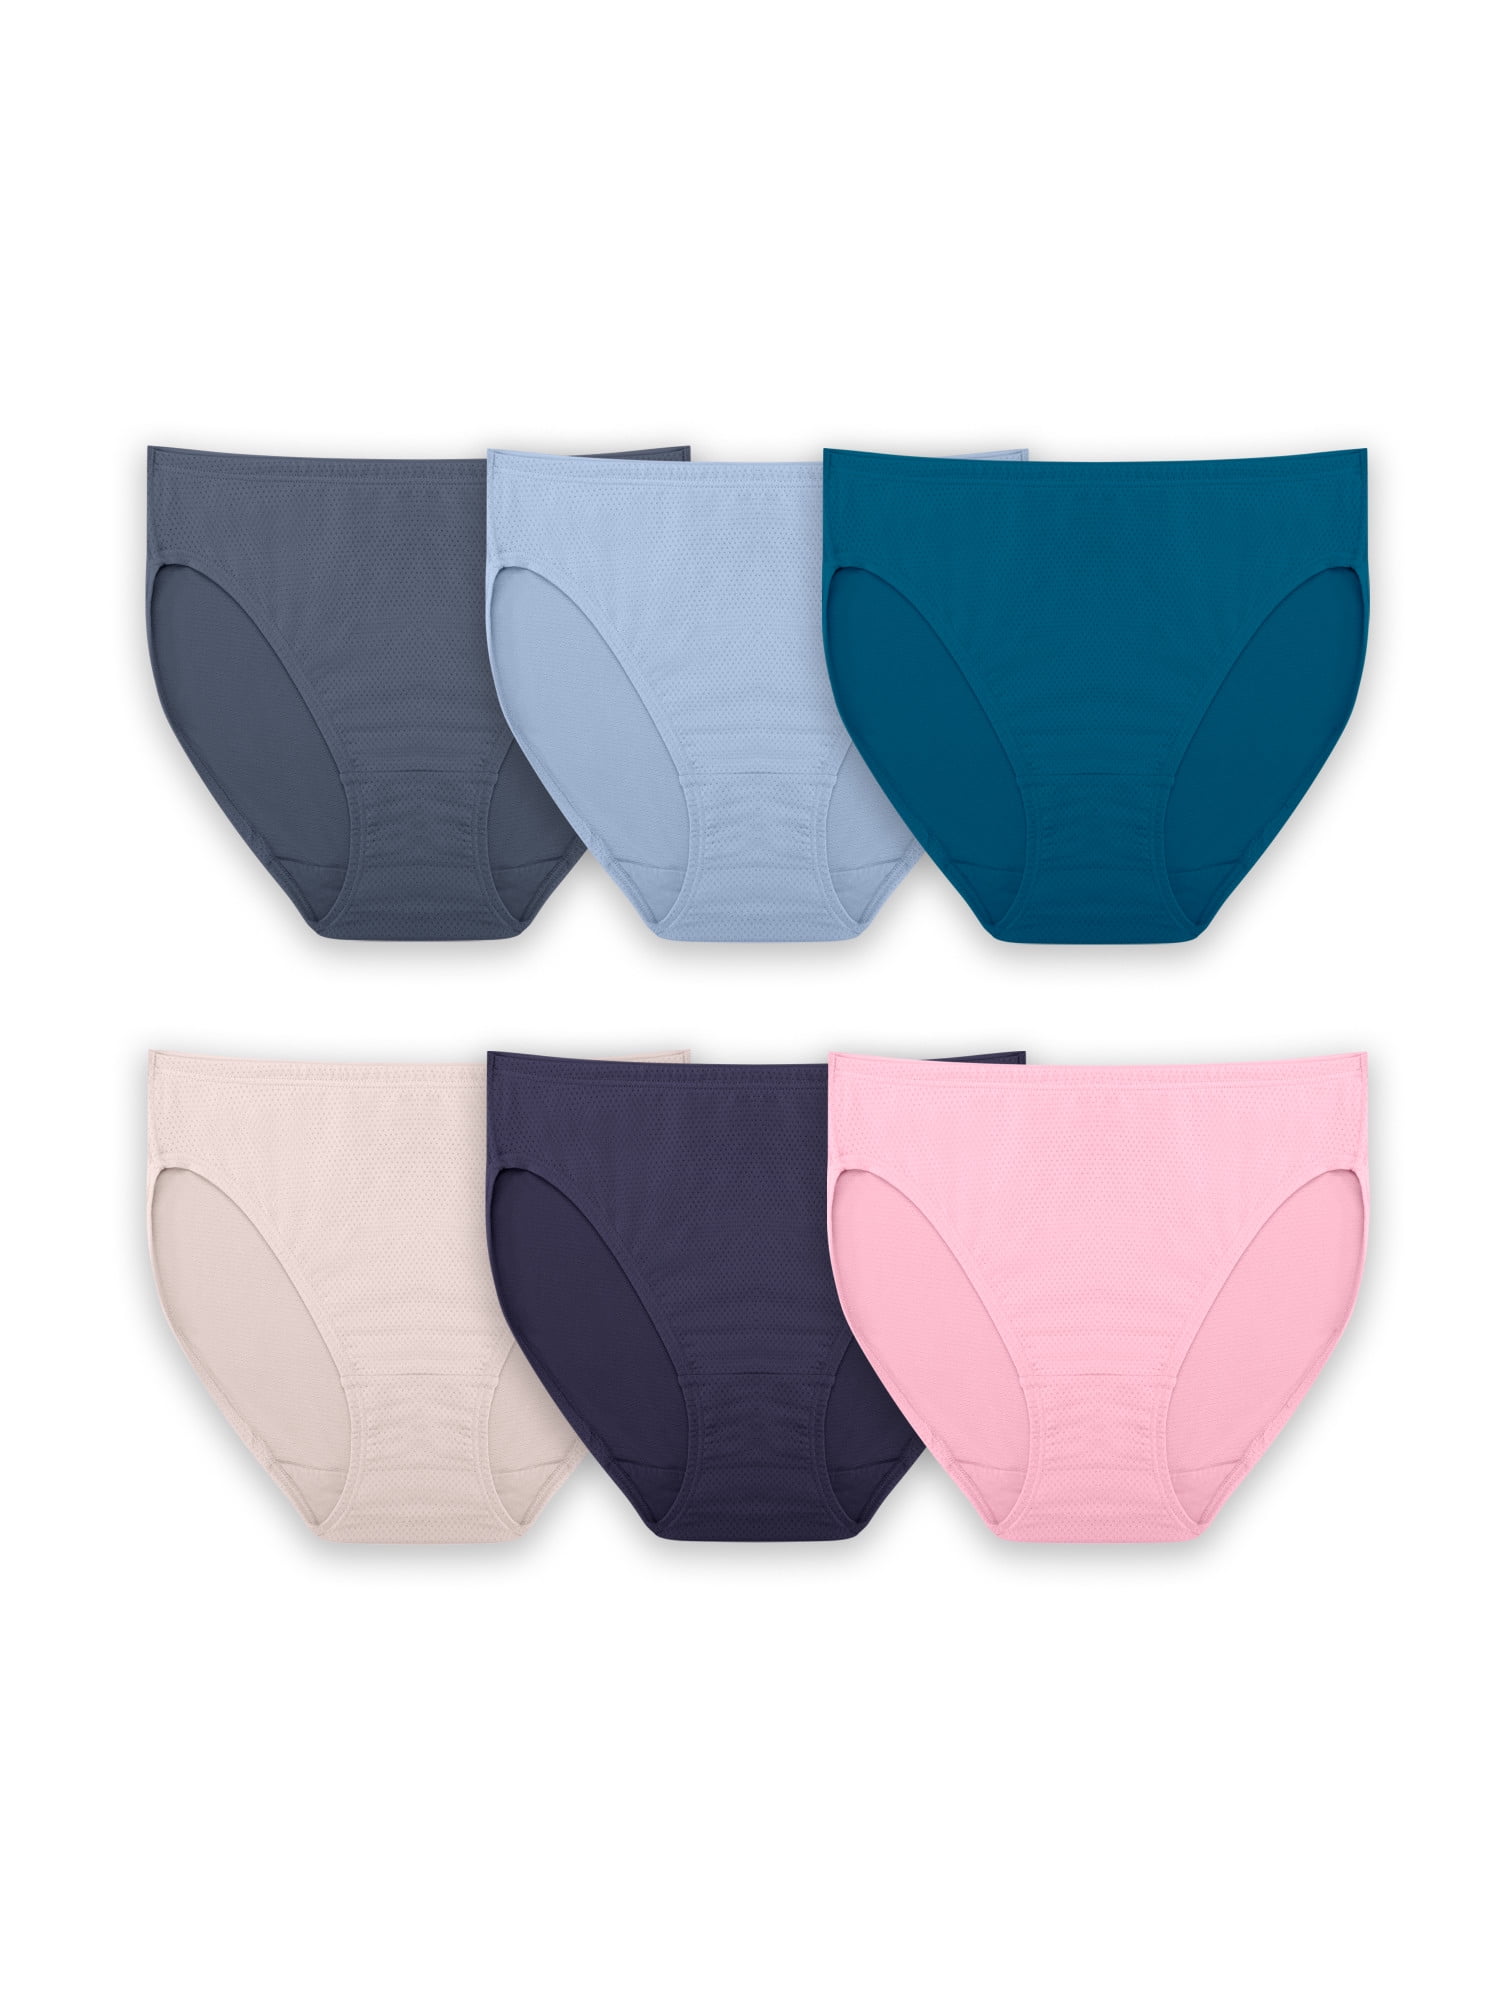 Women's Fruit of the Loom Signature 5-pack Breathable Micro Mesh